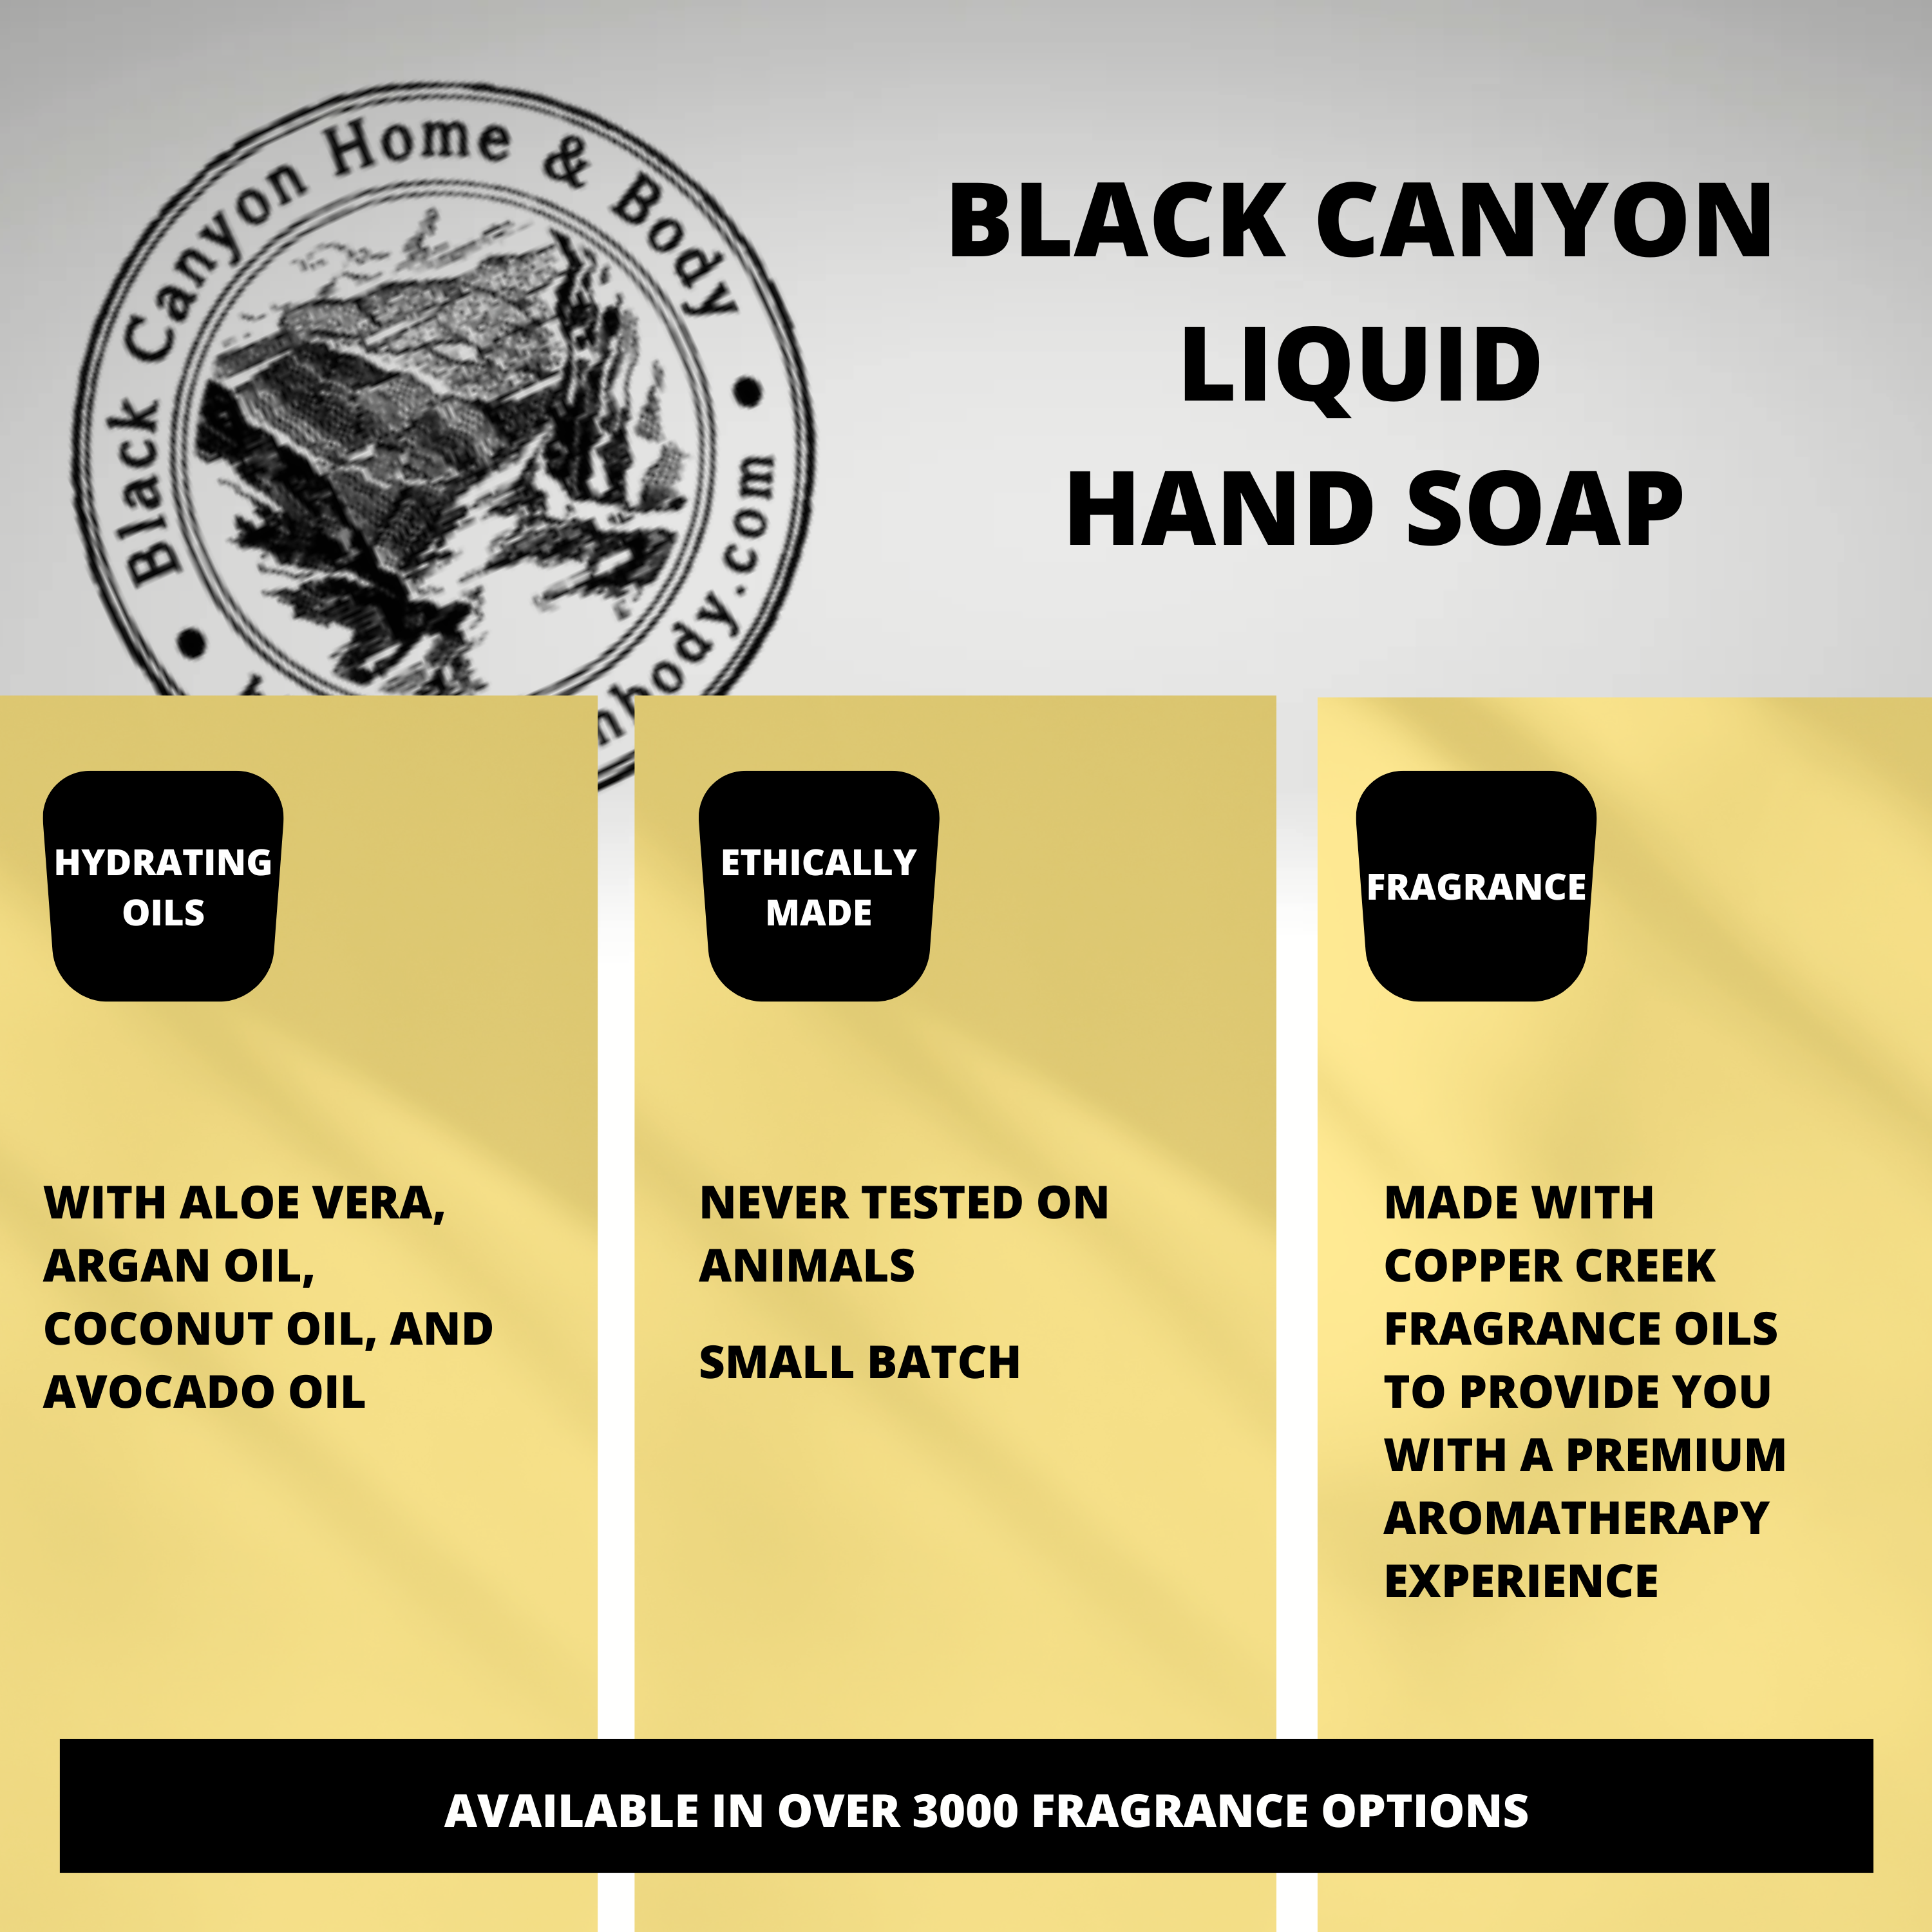 Black Canyon Chocolate Decadence Scented Liquid Hand Soap